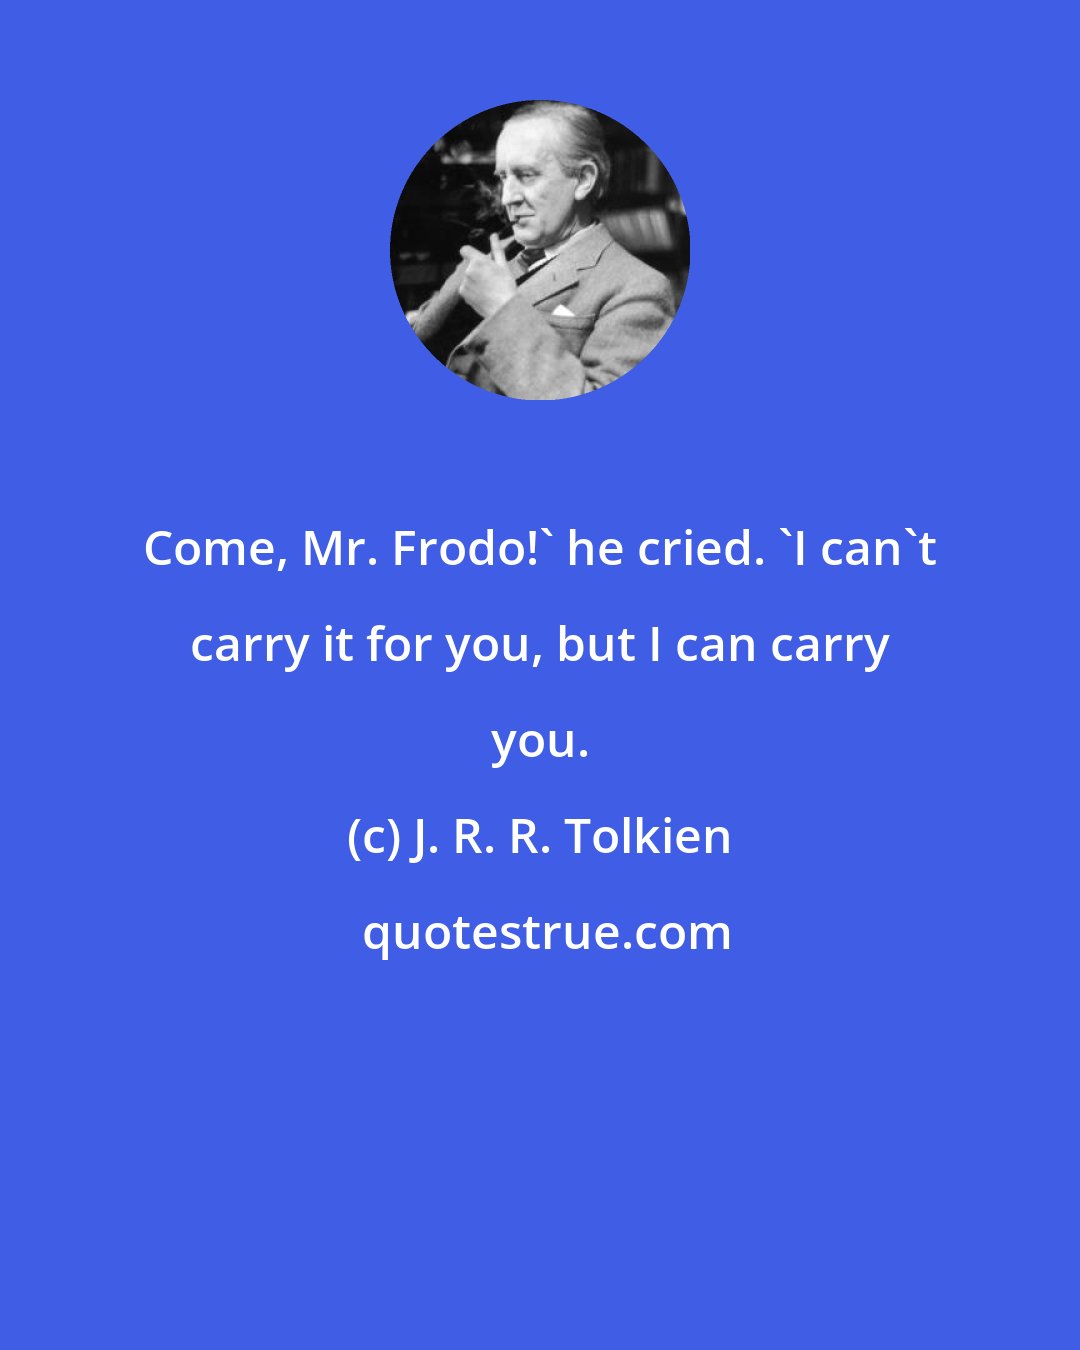 J. R. R. Tolkien: Come, Mr. Frodo!' he cried. 'I can't carry it for you, but I can carry you.